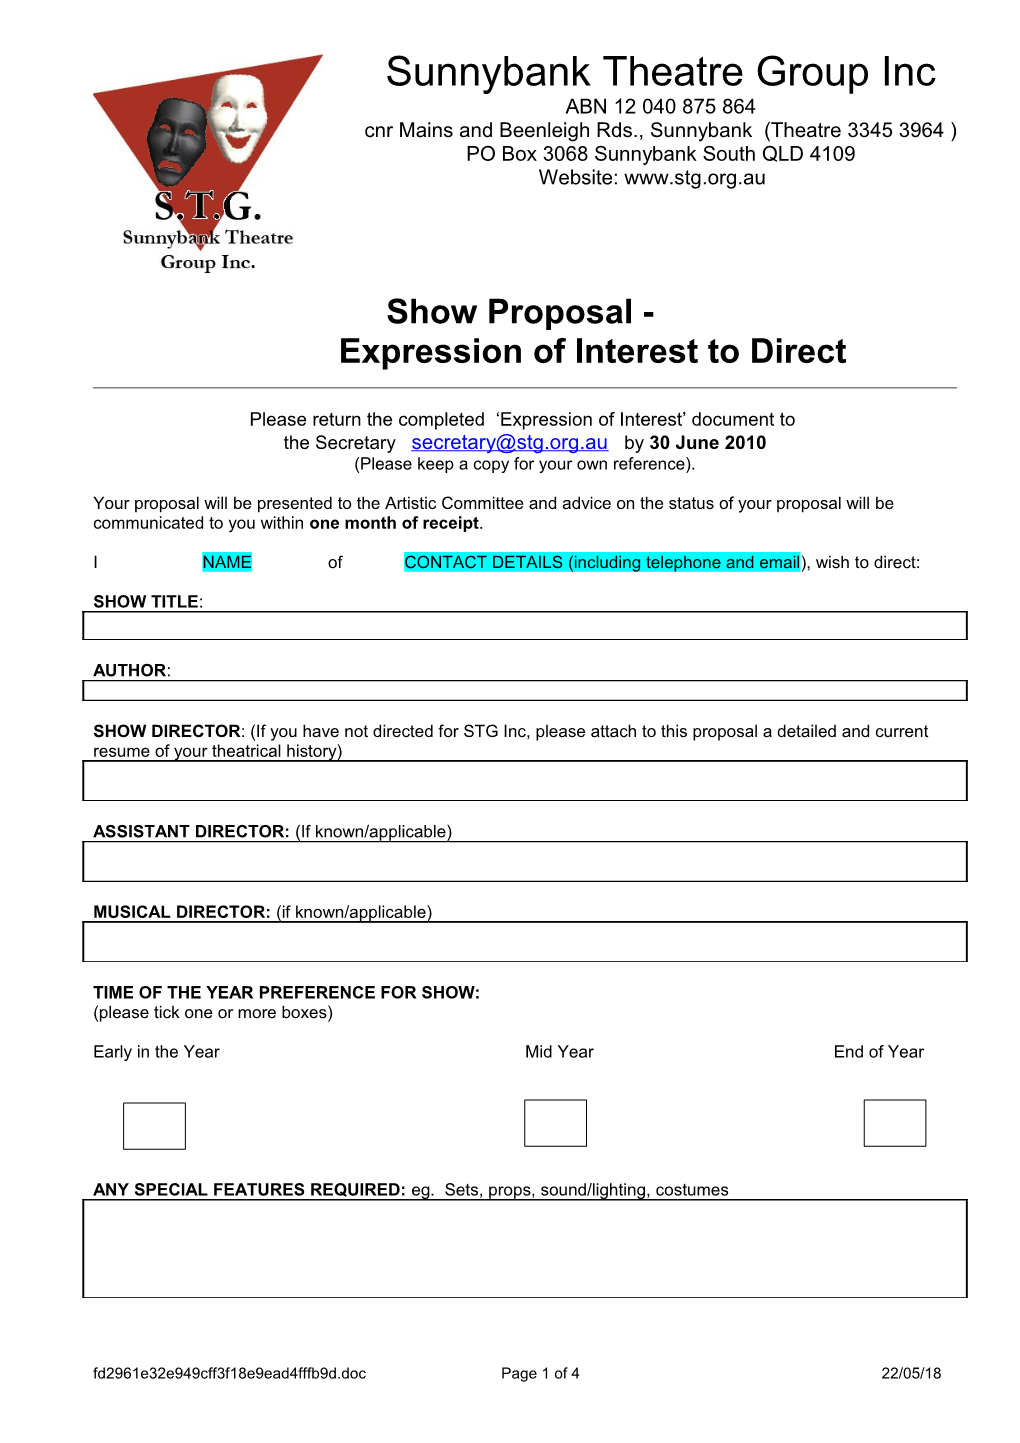 Show Proposal - Expression of Interest to Direct